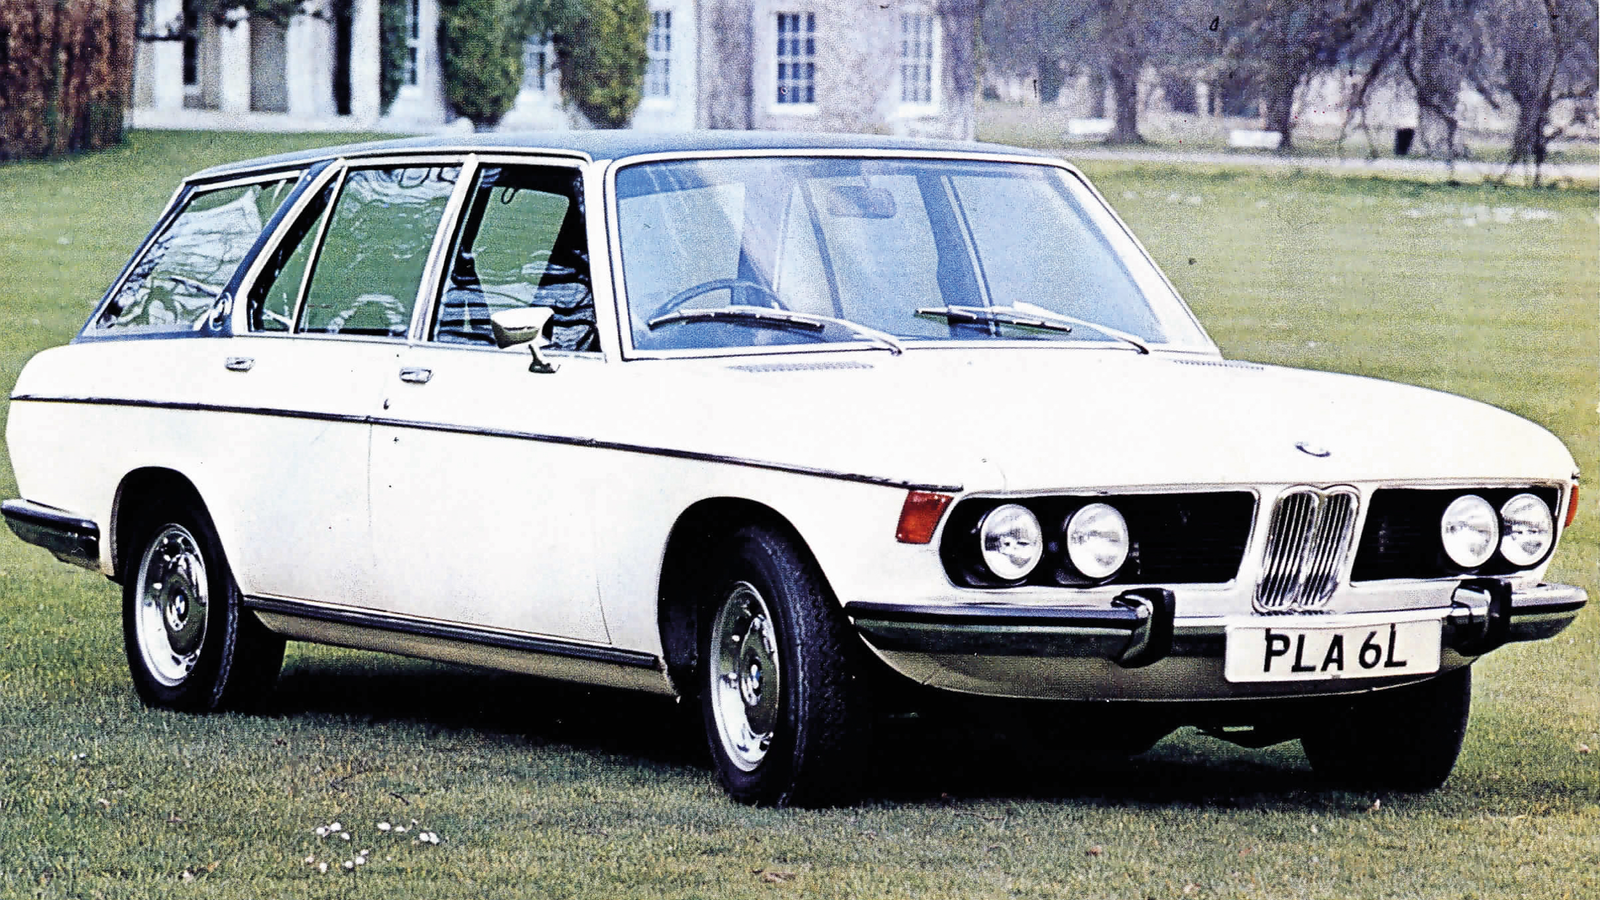 One of a kind: meet the only BMW E3 Estate in the world